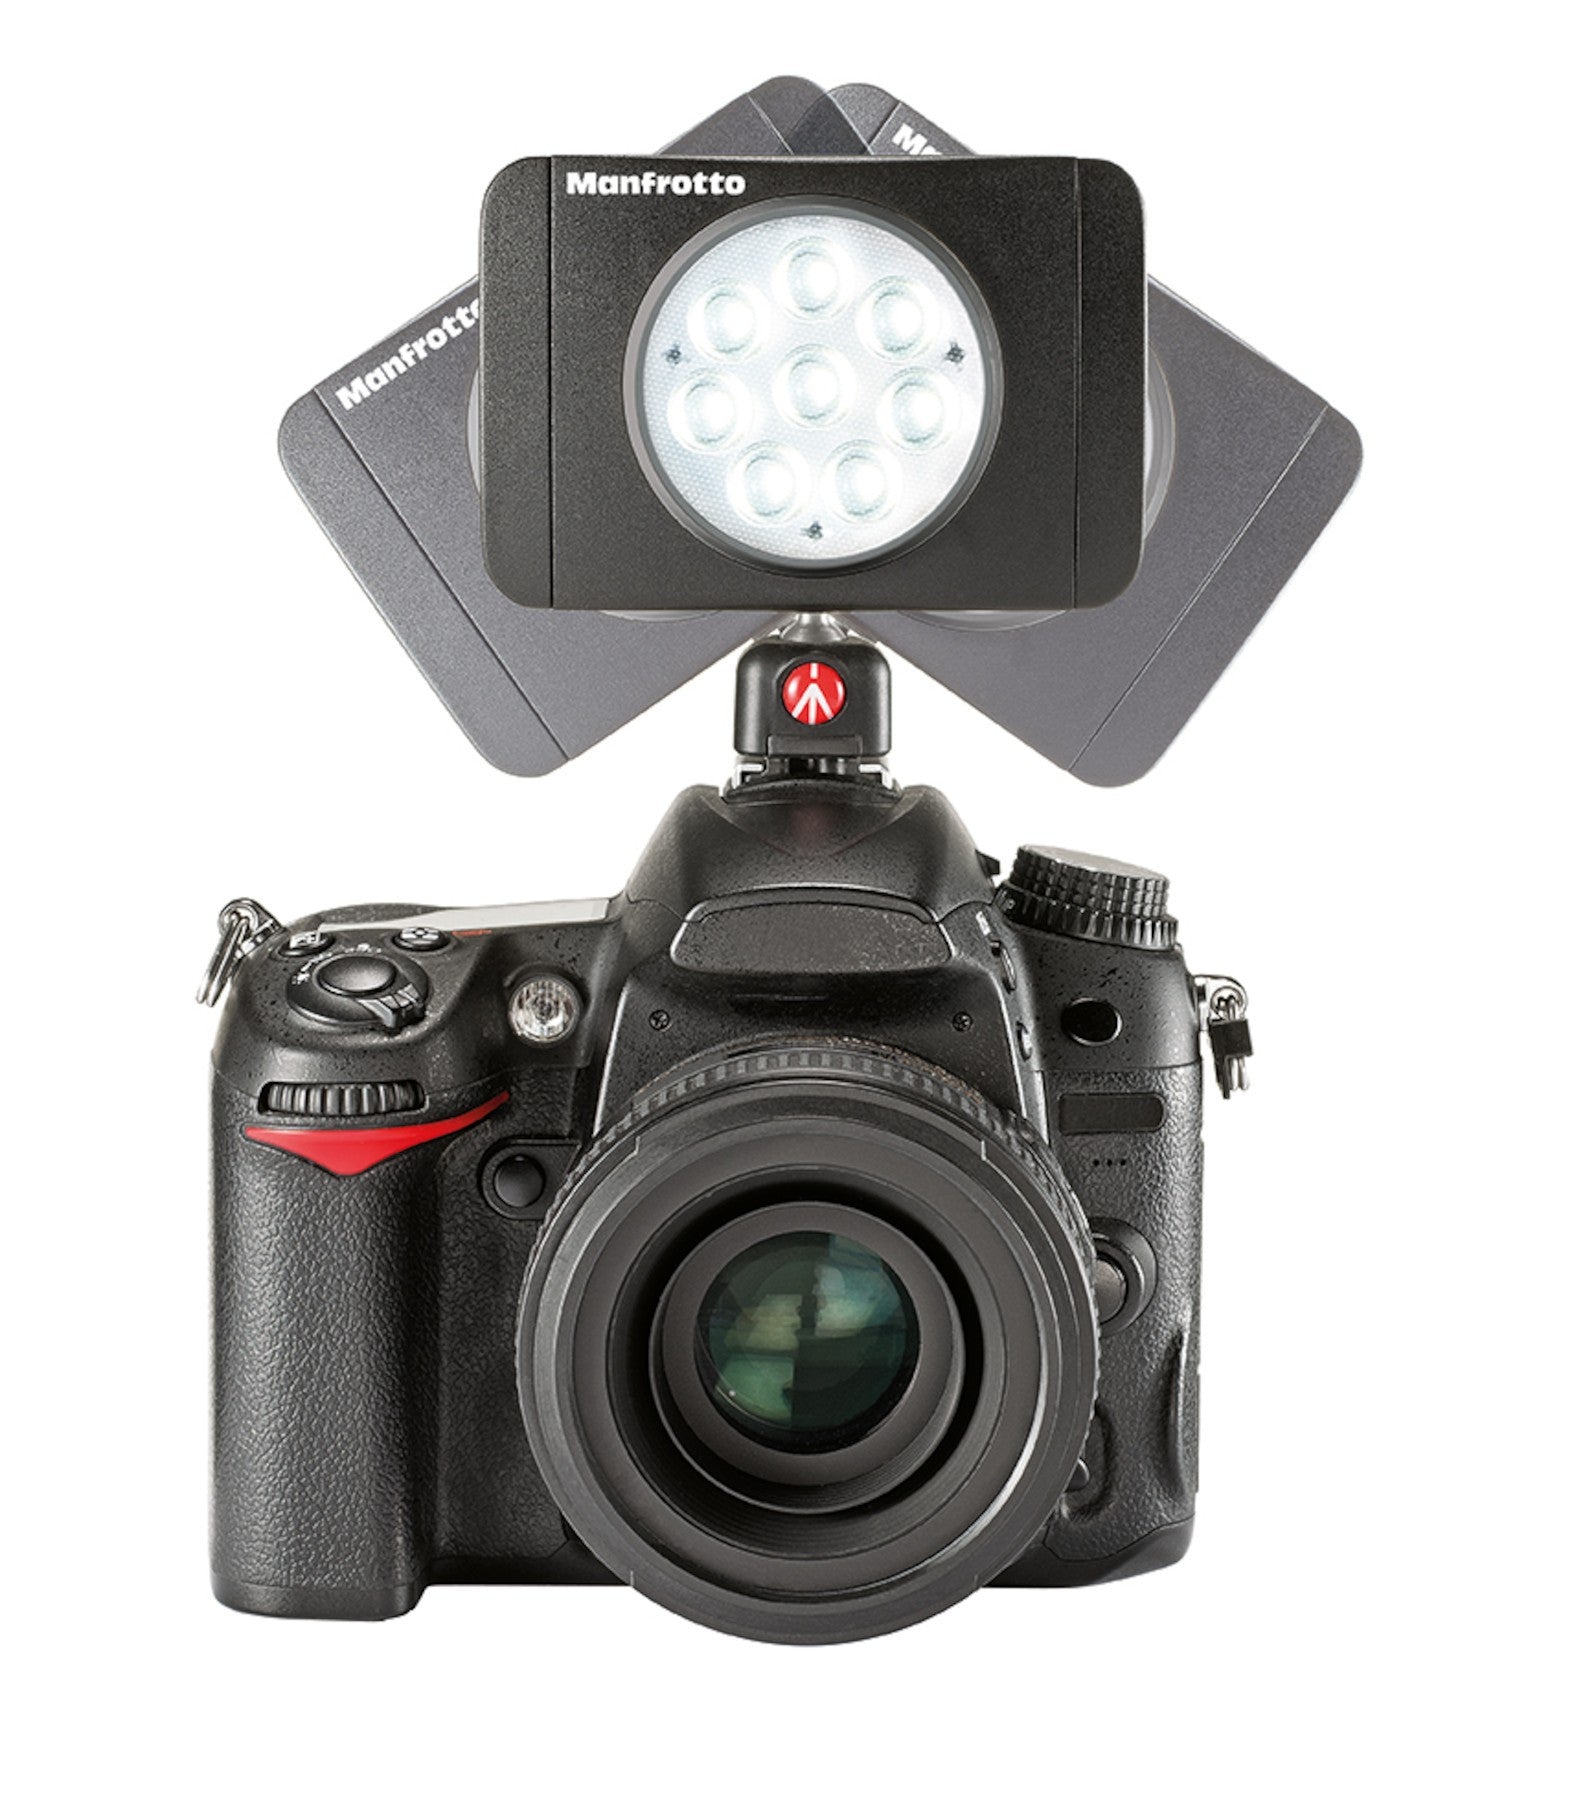 Manfrotto Lumie Series Muse LED Light, lighting led lights, Manfrotto - Pictureline  - 3